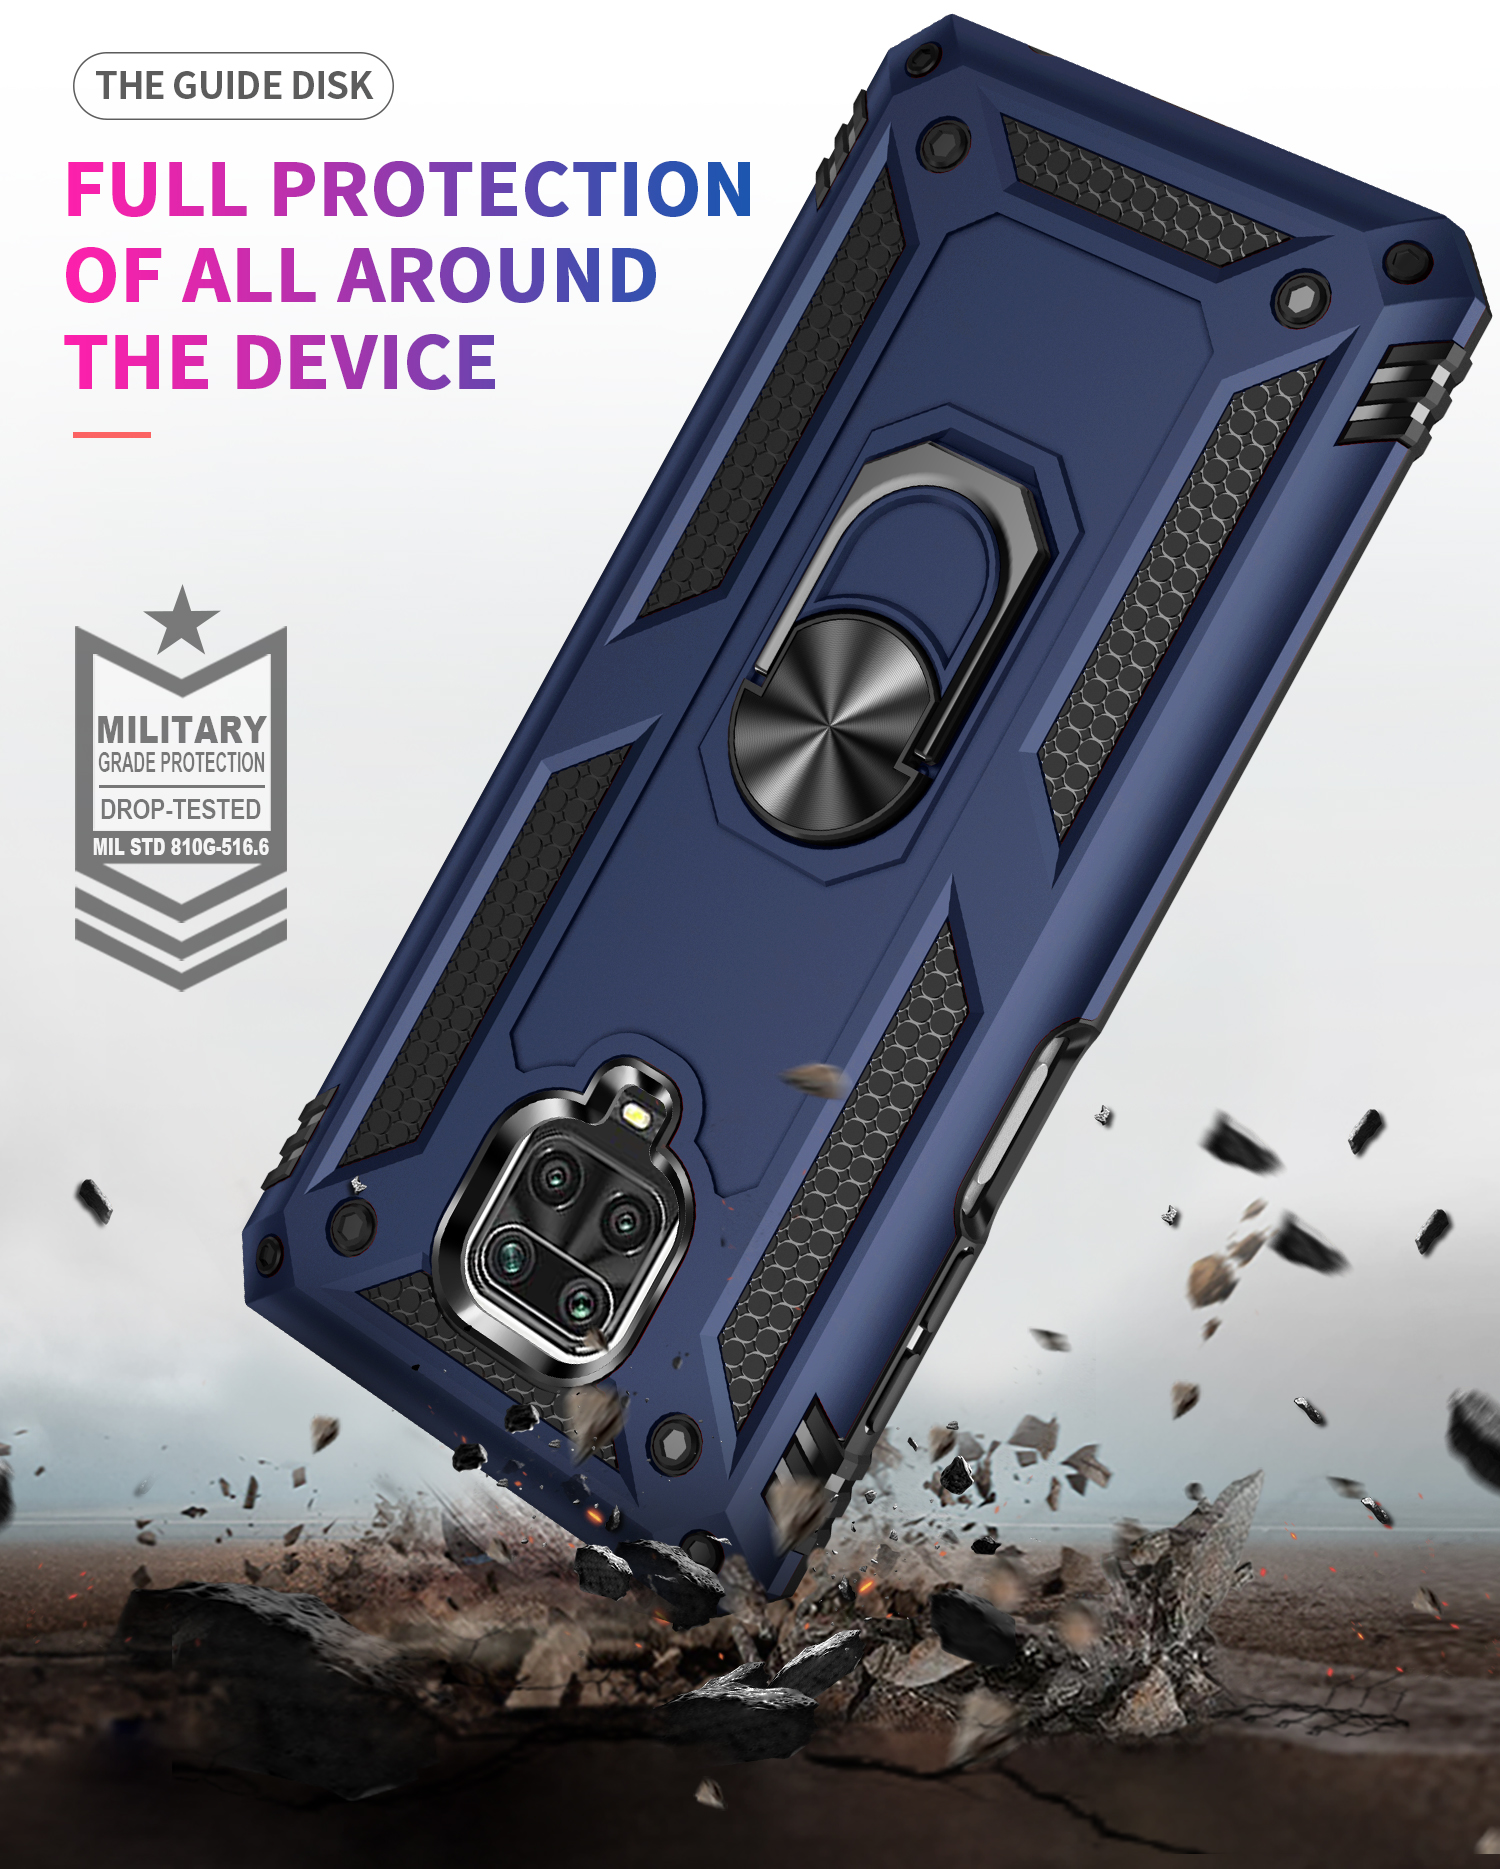 Bakeey Armor with 360° Degree Rotatable Magnetic Ring Holder Shockproof PC Protective Case for Xiaomi Redmi Note 9S / Redmi Note 9 Pro Non-original